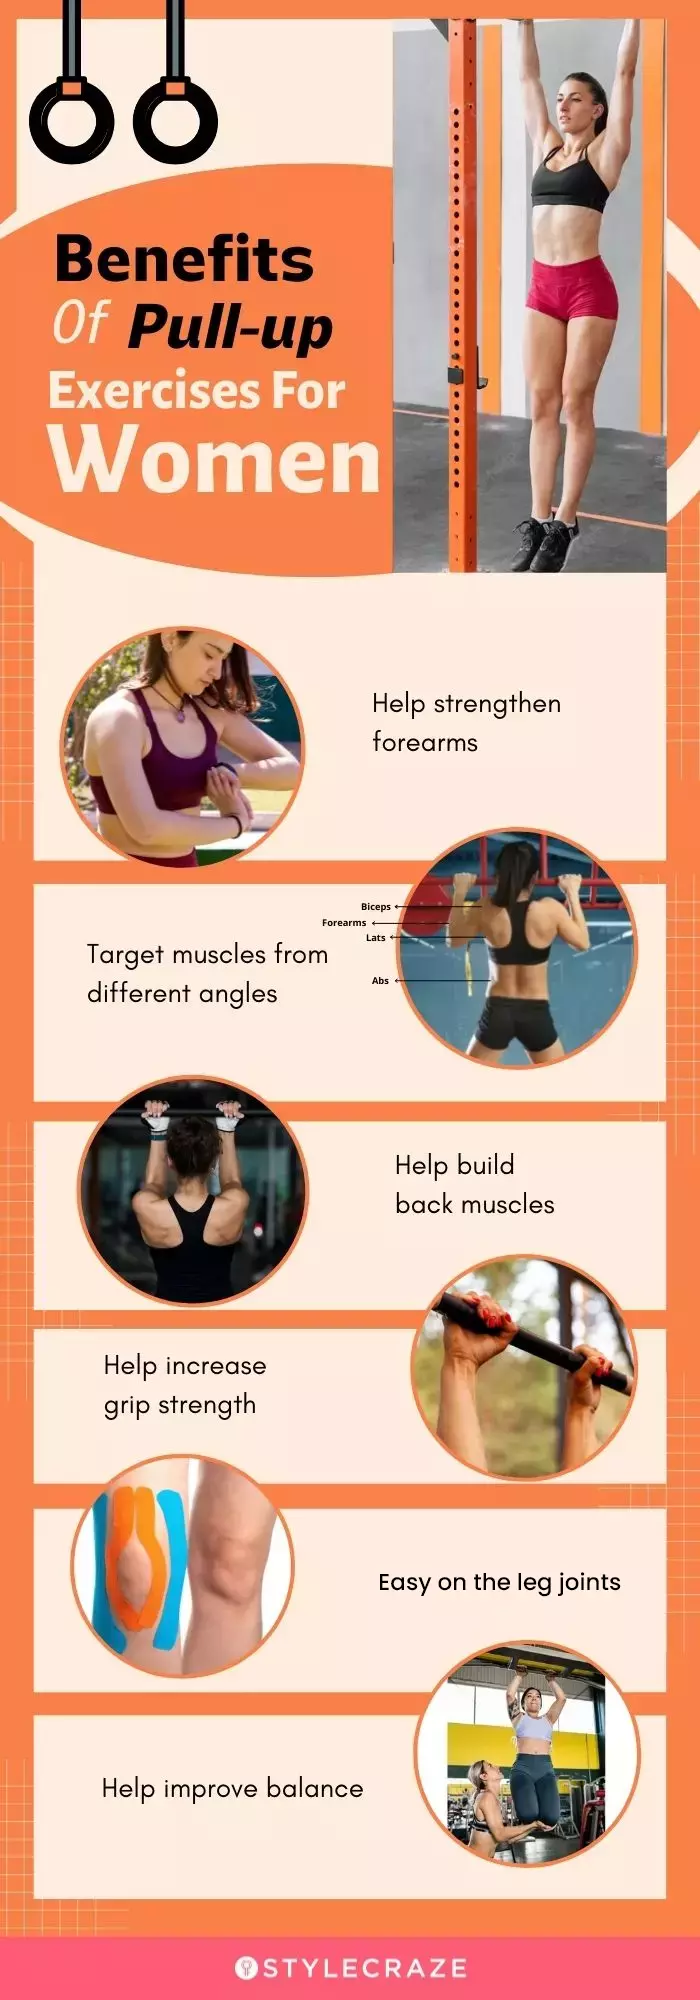 benefits of pull up exercises for women (infographic)